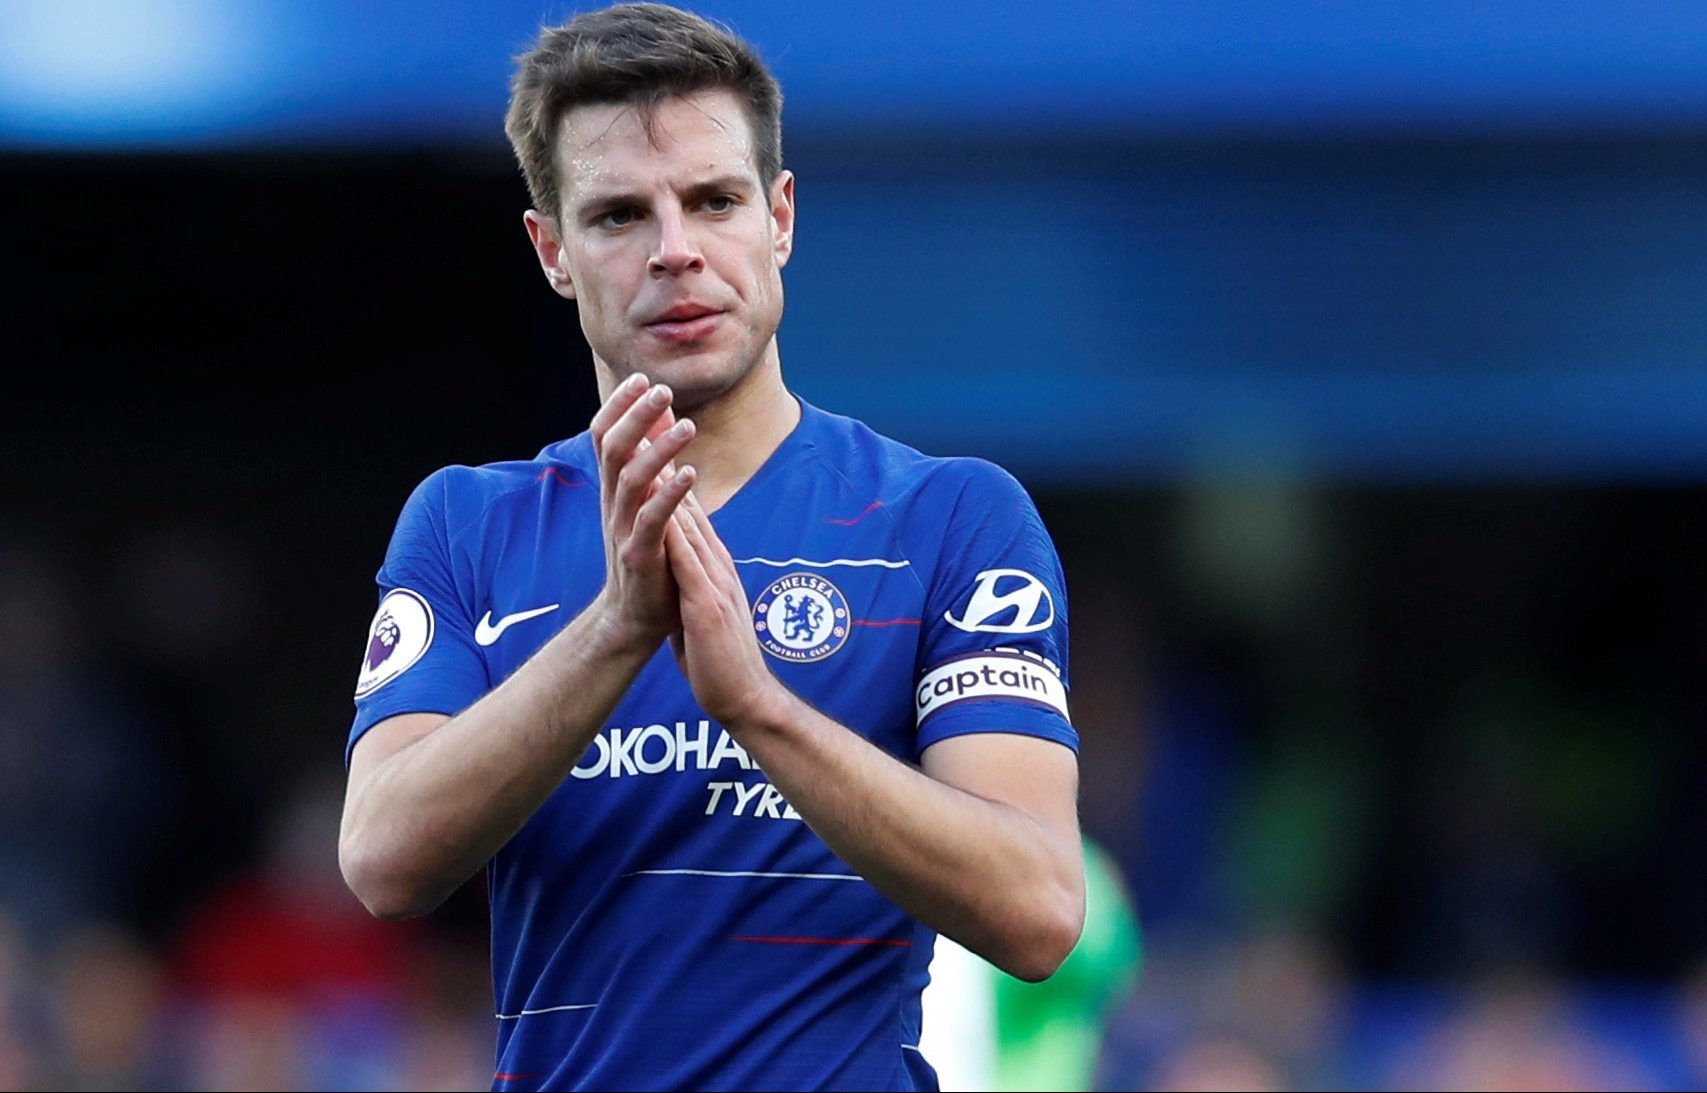 Soccer Football - Premier League - Chelsea v Wolverhampton Wanderers - Stamford Bridge, London, Britain - March 10, 2019  Chelsea's Cesar Azpilicueta applauds fans after the match    REUTERS/David Klein  EDITORIAL USE ONLY. No use with unauthorized audio, video, data, fixture lists, club/league logos or 